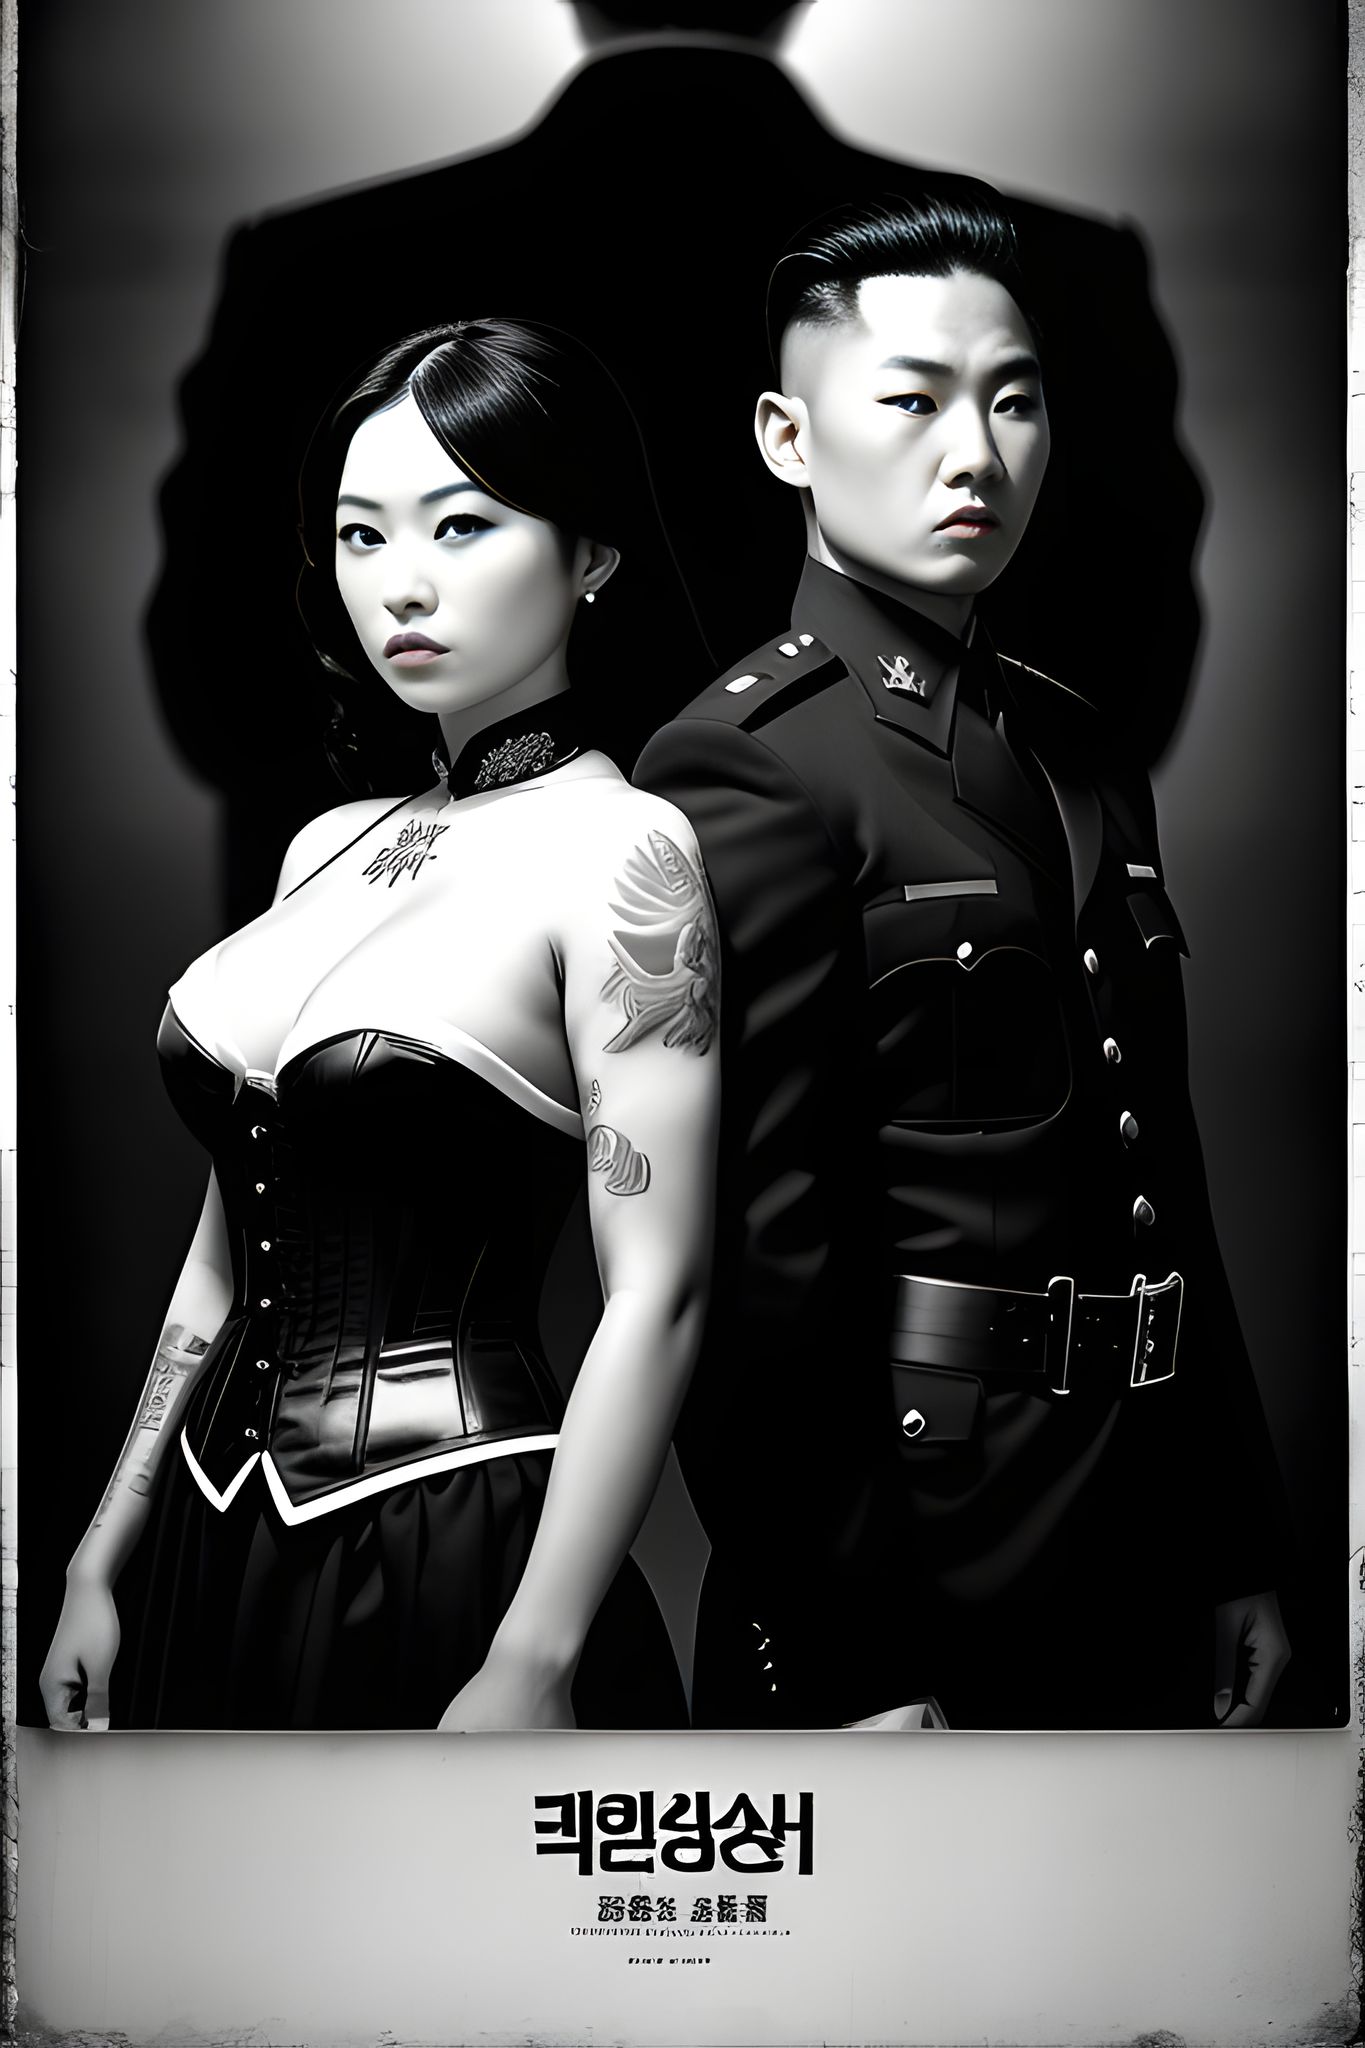 Two-people-Wide-portrait-of-a-North-Korean-5r22